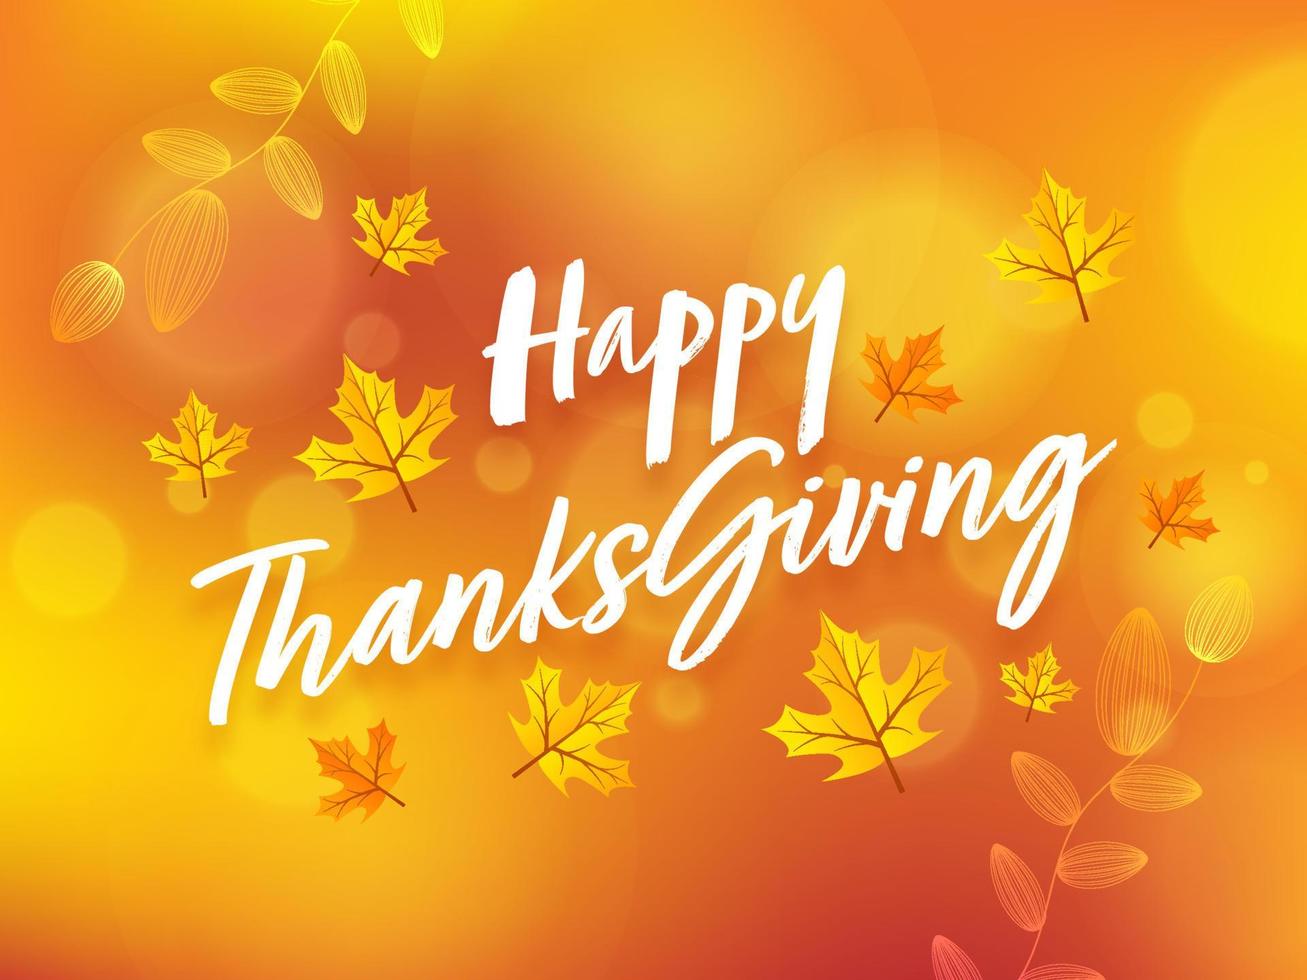 Happy Thanksgiving Font with Autumn Leaves on Orange Blurred Background. vector